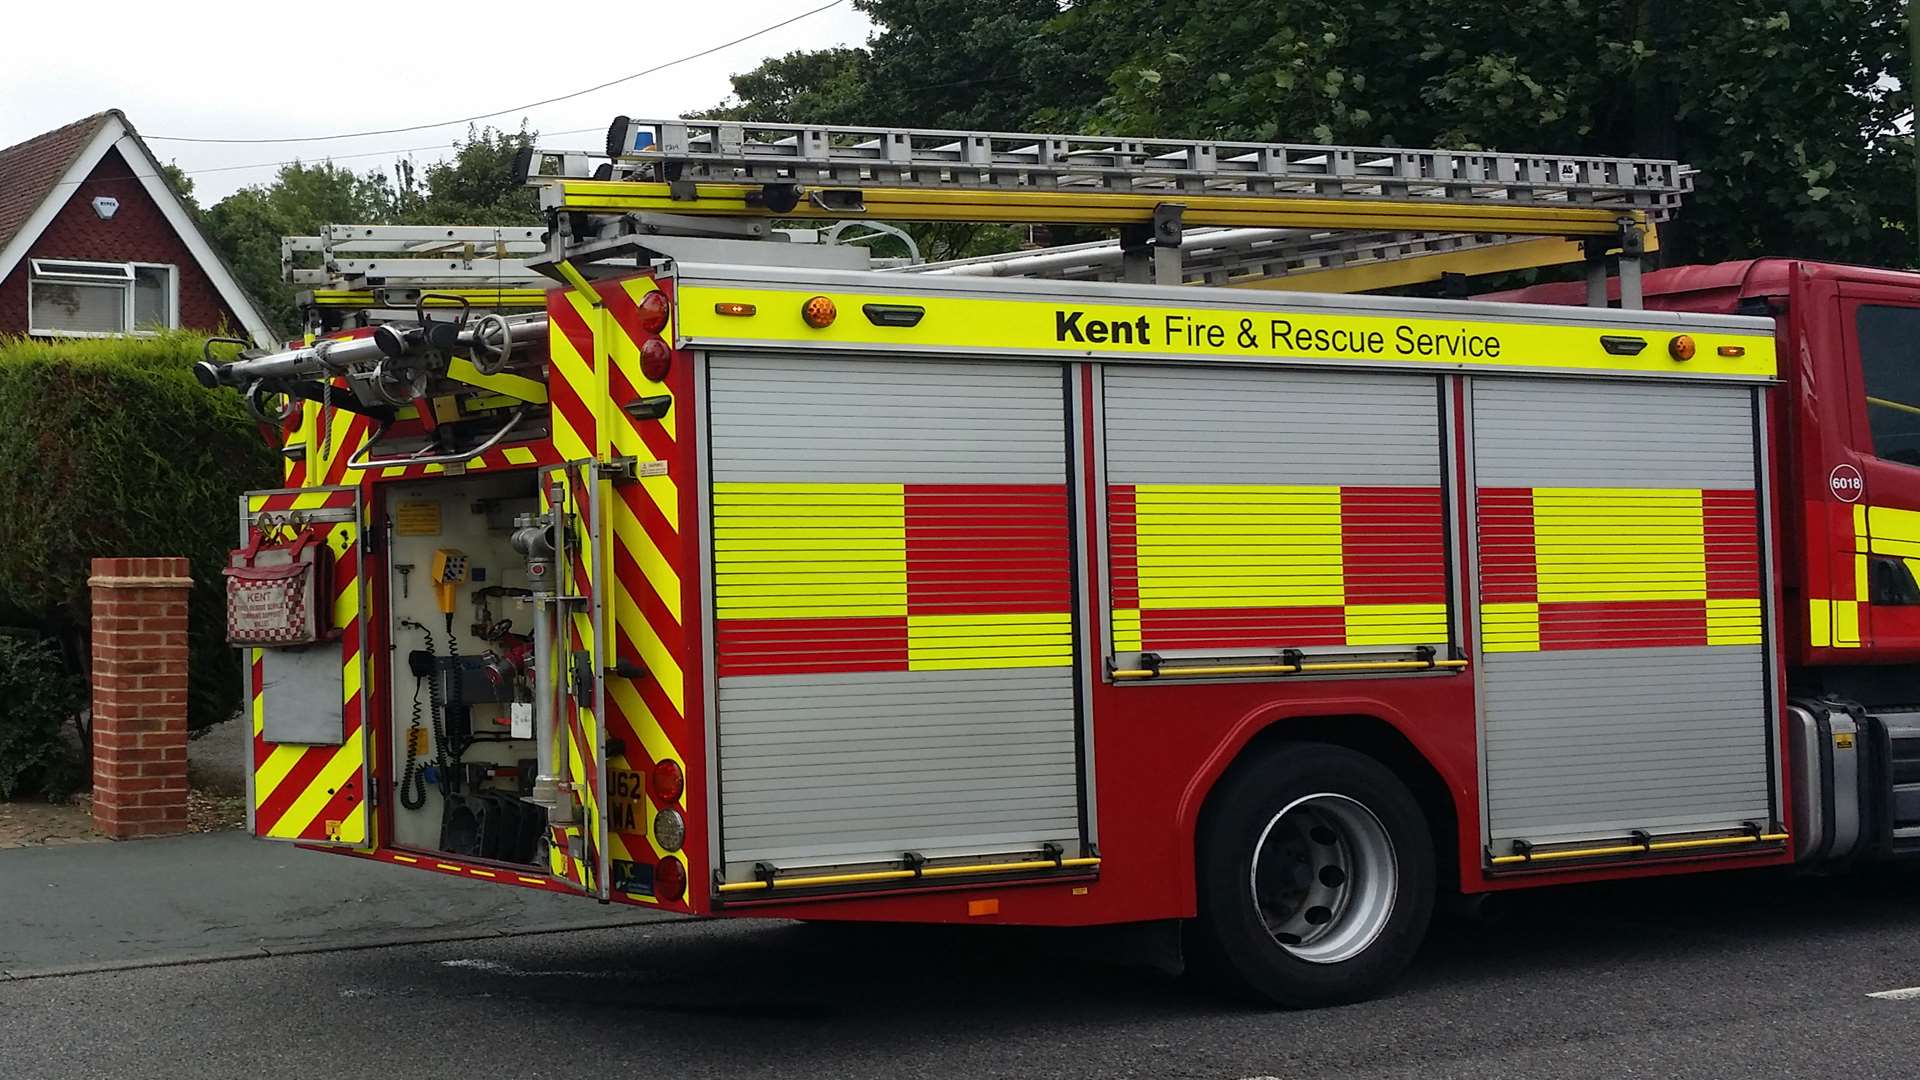 Two fire engines attended the blaze in Wigmore